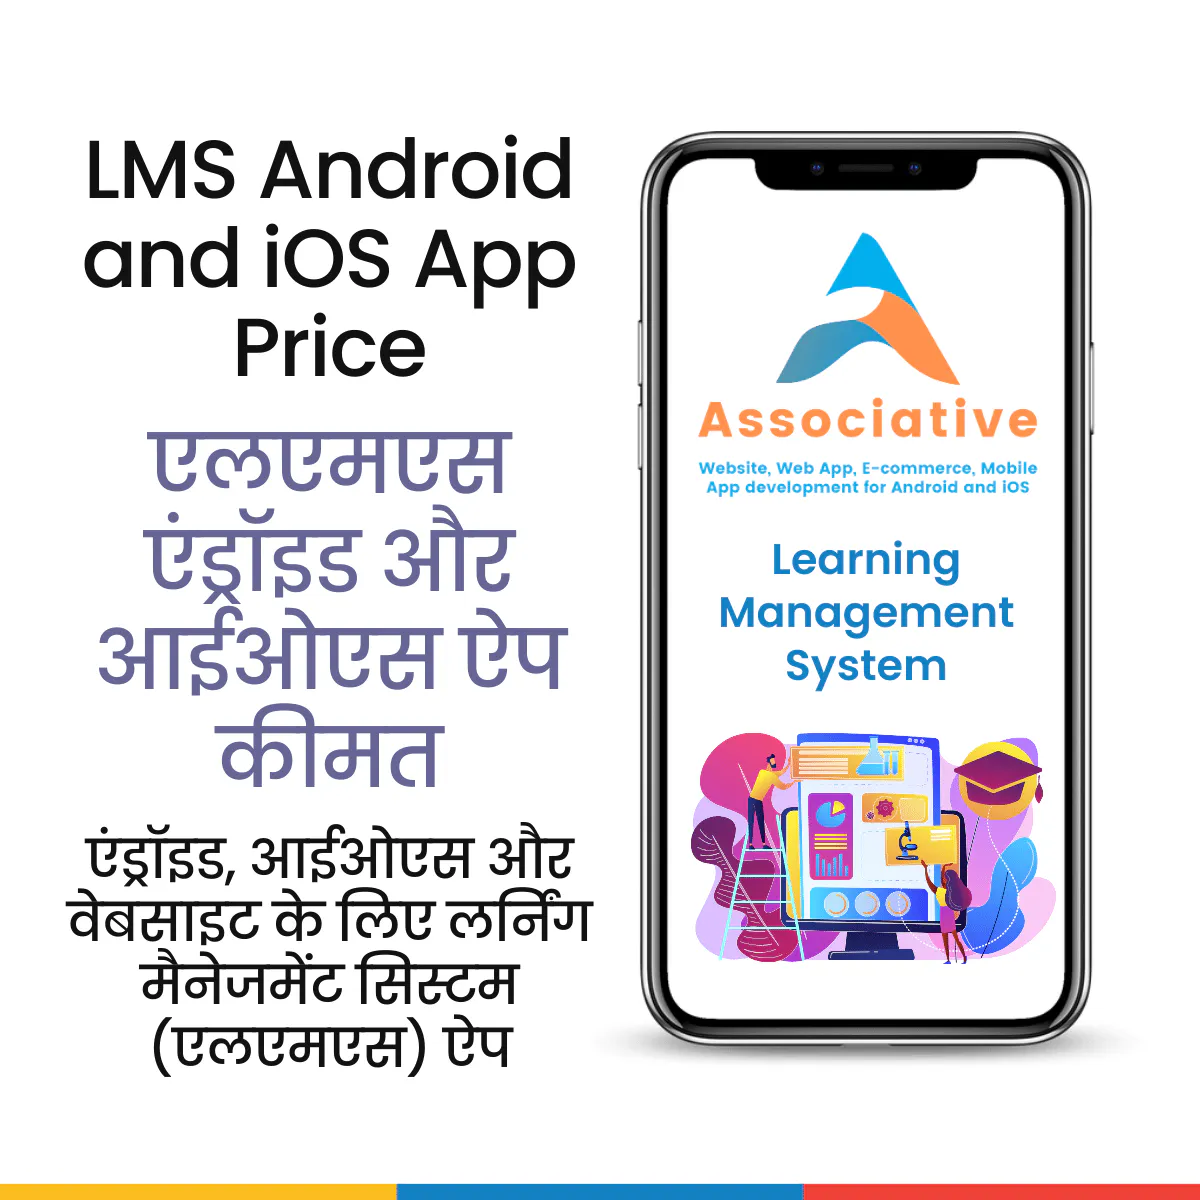 LMS Android and iOS App